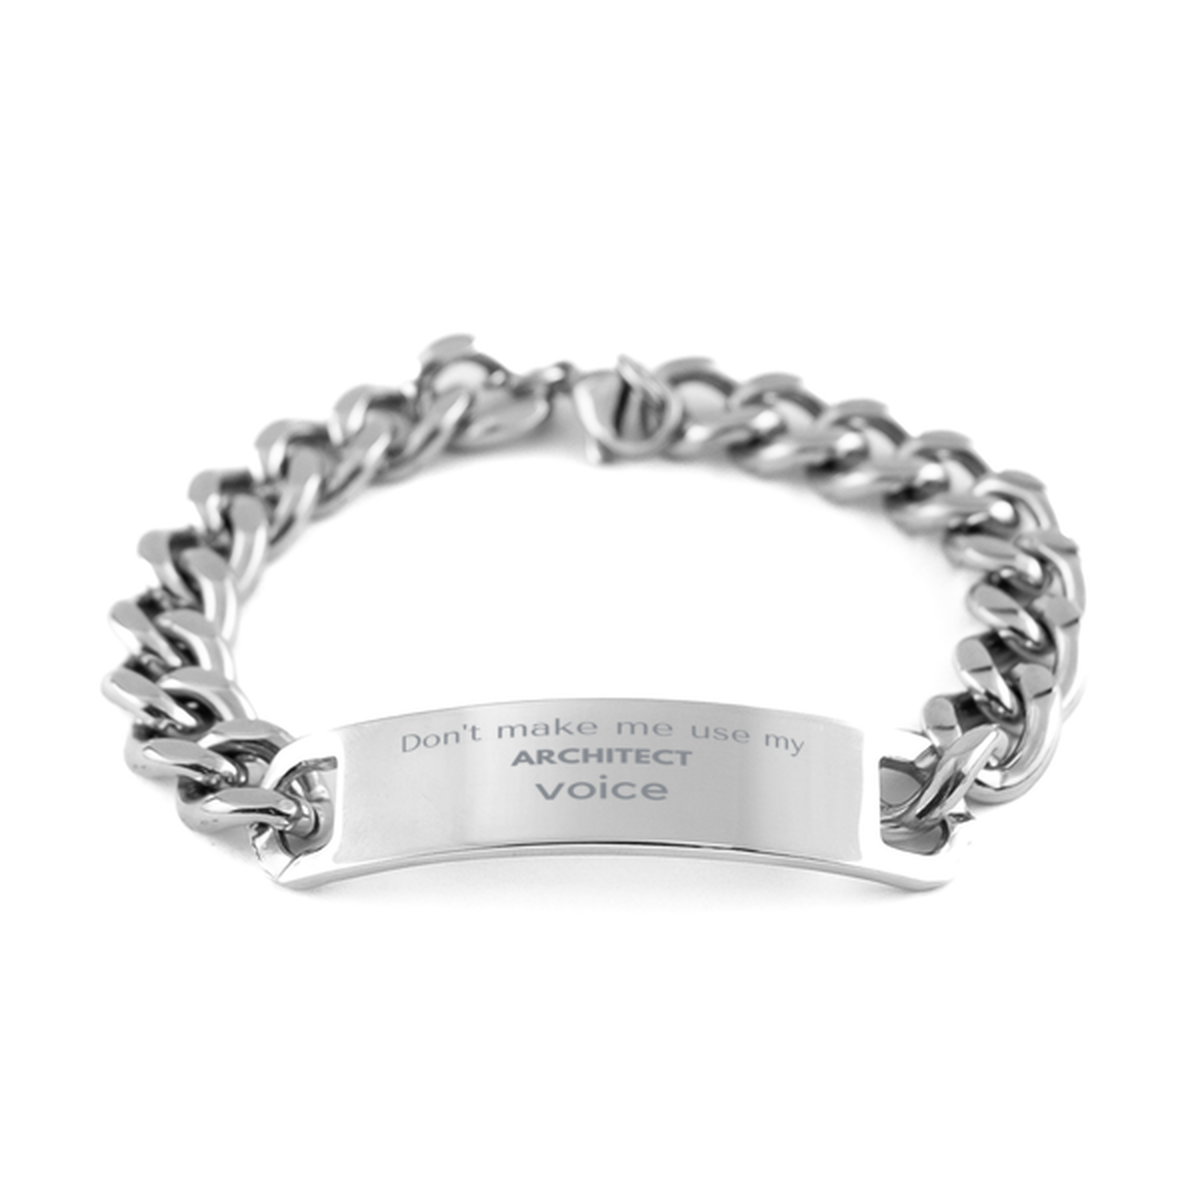 Don't make me use my Architect voice, Sarcasm Architect Gifts, Christmas Architect Cuban Chain Stainless Steel Bracelet Birthday Unique Gifts For Architect Coworkers, Men, Women, Colleague, Friends